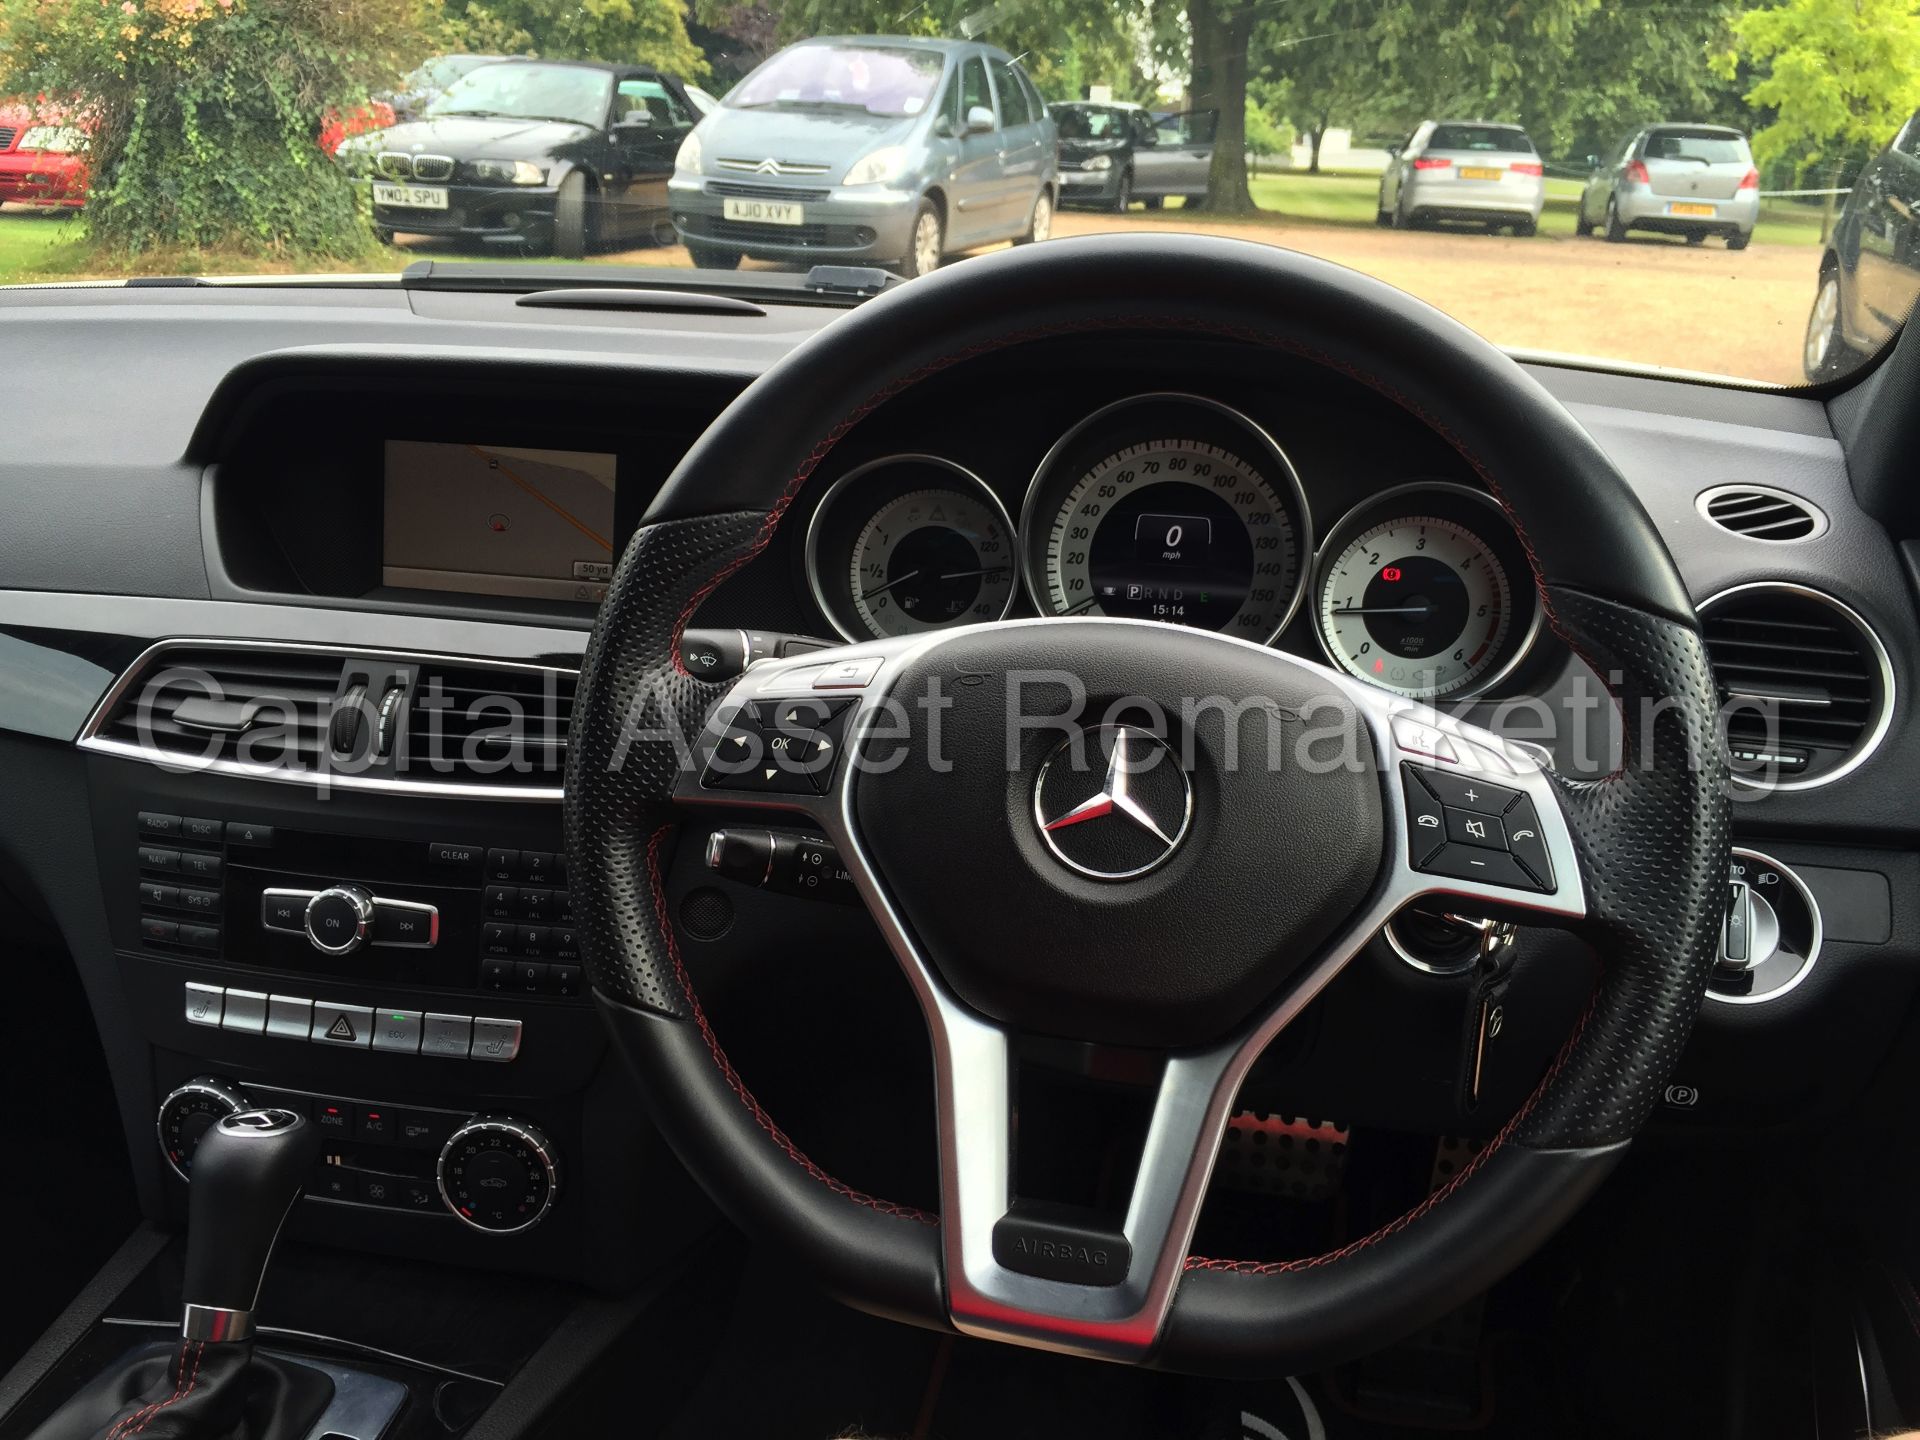 MERCEDES-BENZ C220 CDI 'AMG SPORT PLUS' (2014 MODEL) '7-G AUTO - LEATHER - SAT NAV' (1 OWNER) - Image 17 of 29